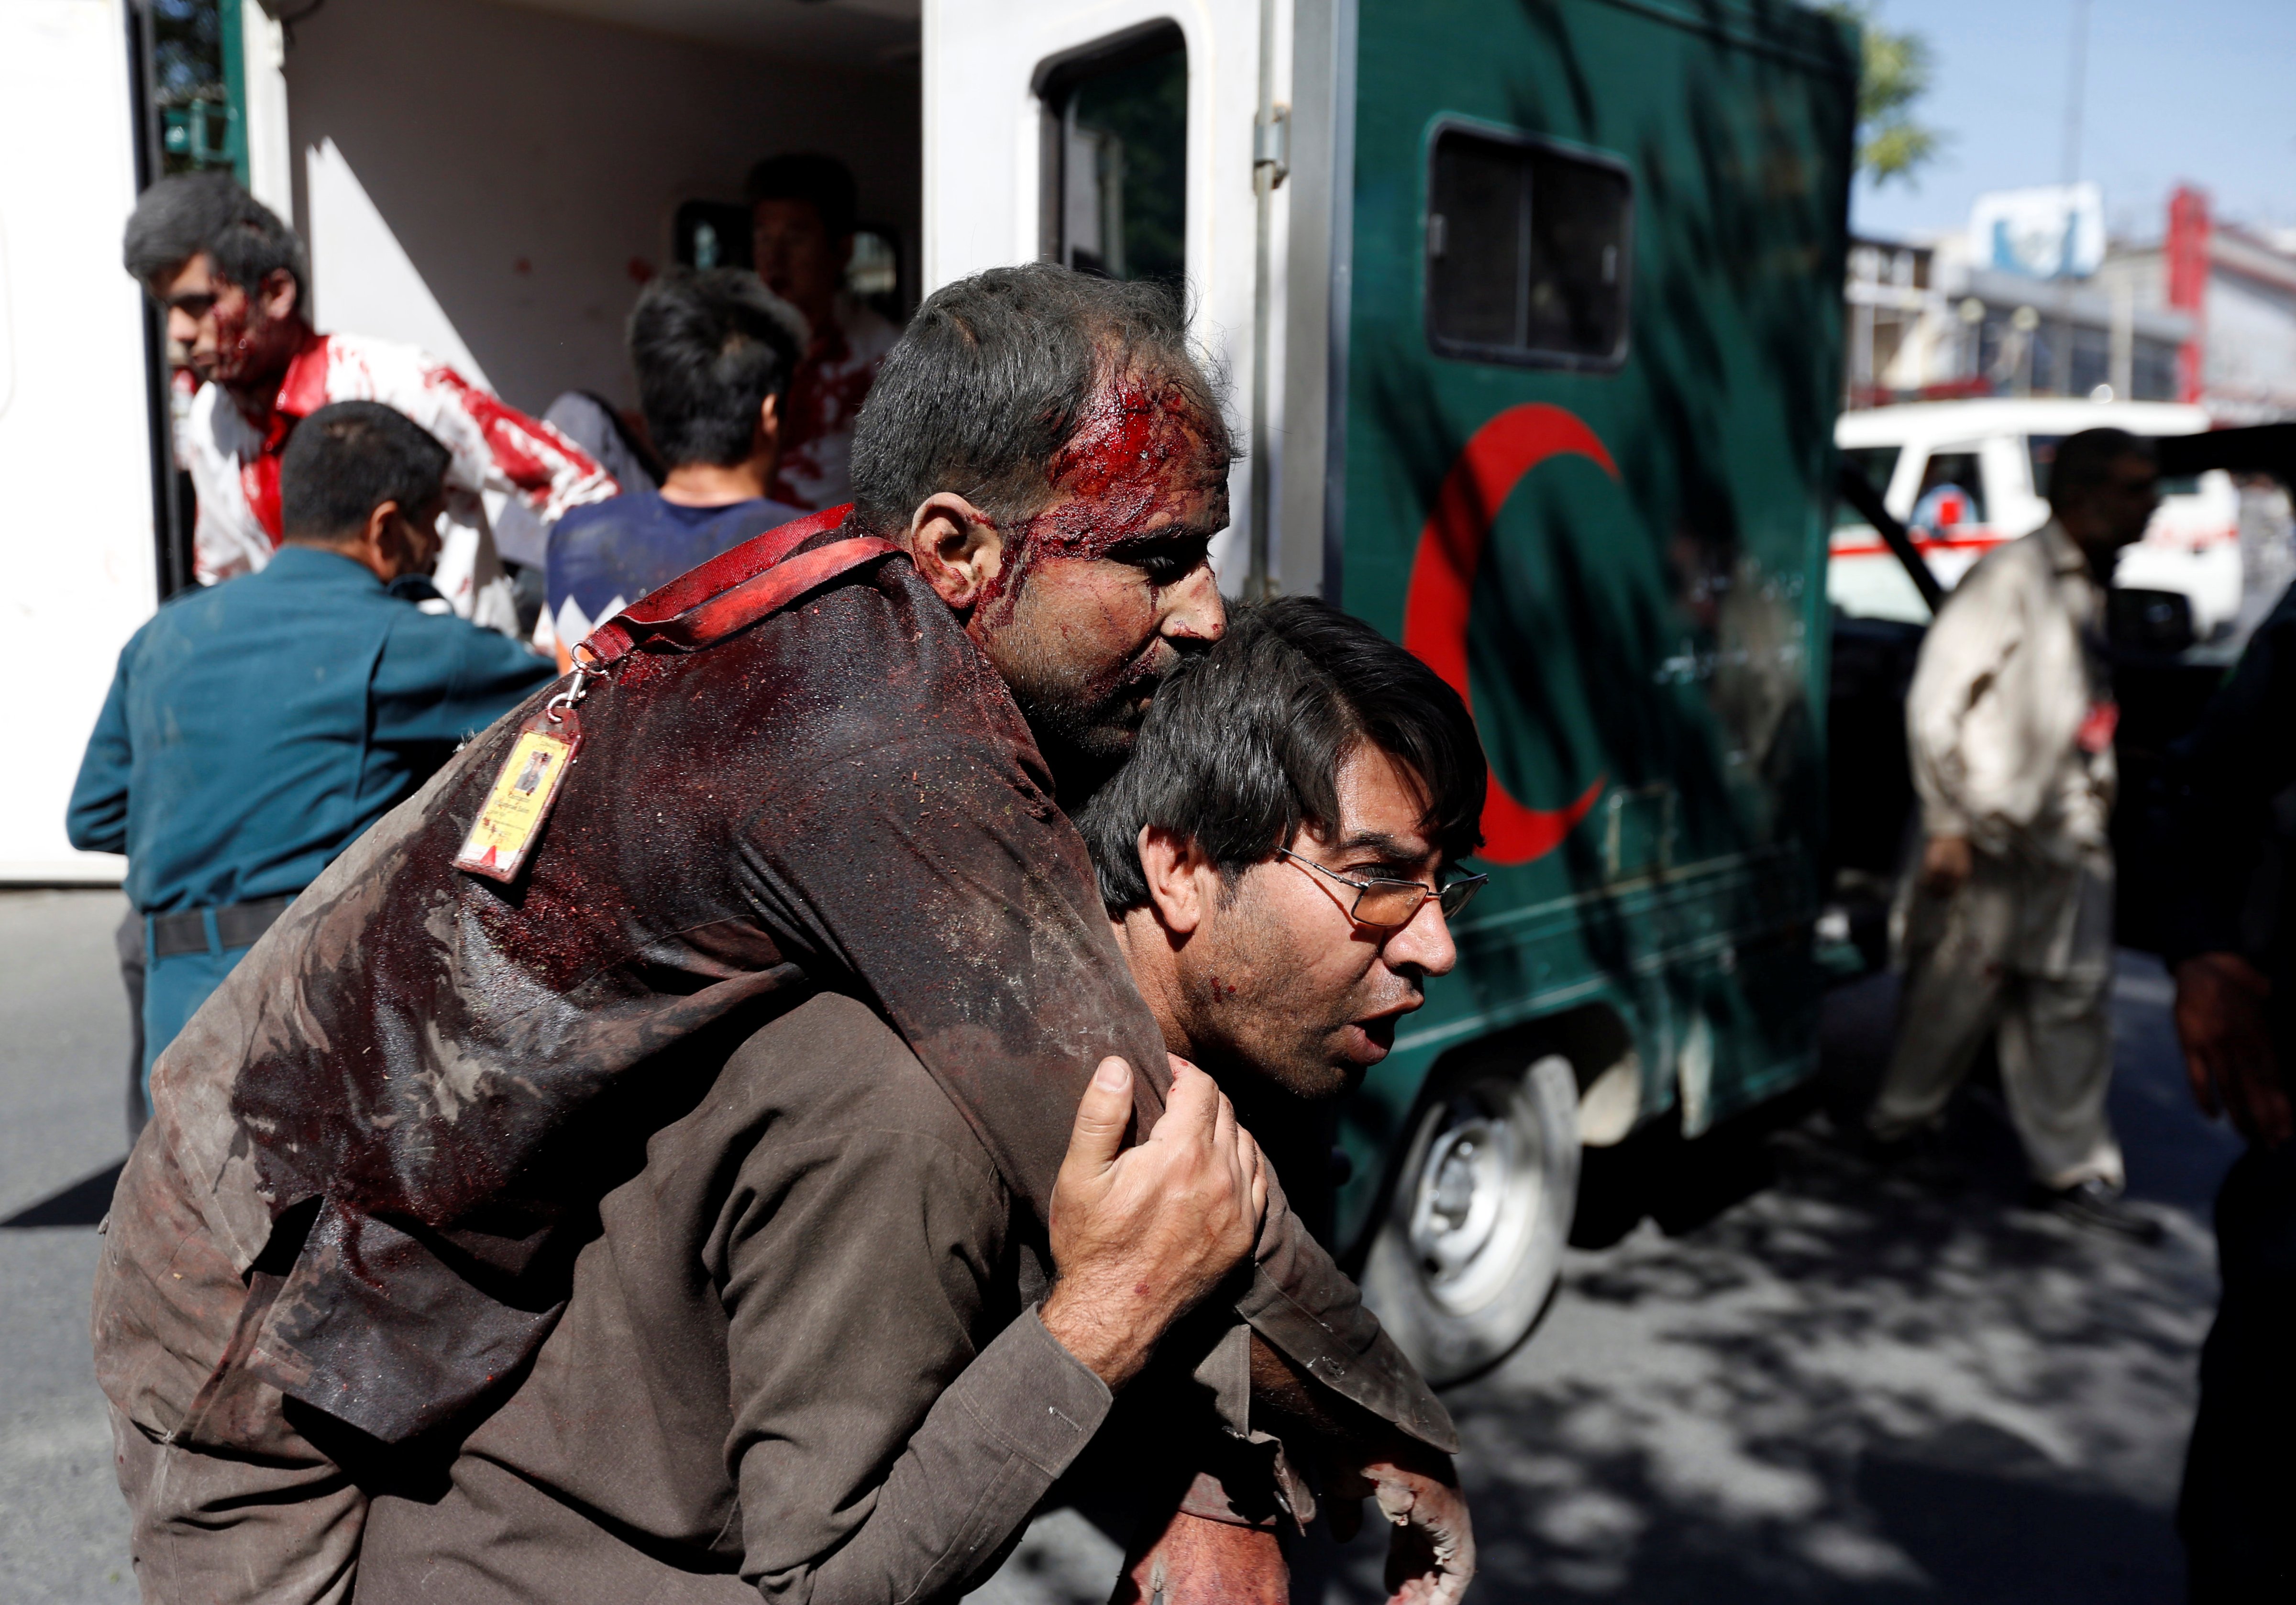 An Afghan man carries an injured man to a hospital after a blast in Kabul, Afghanistan